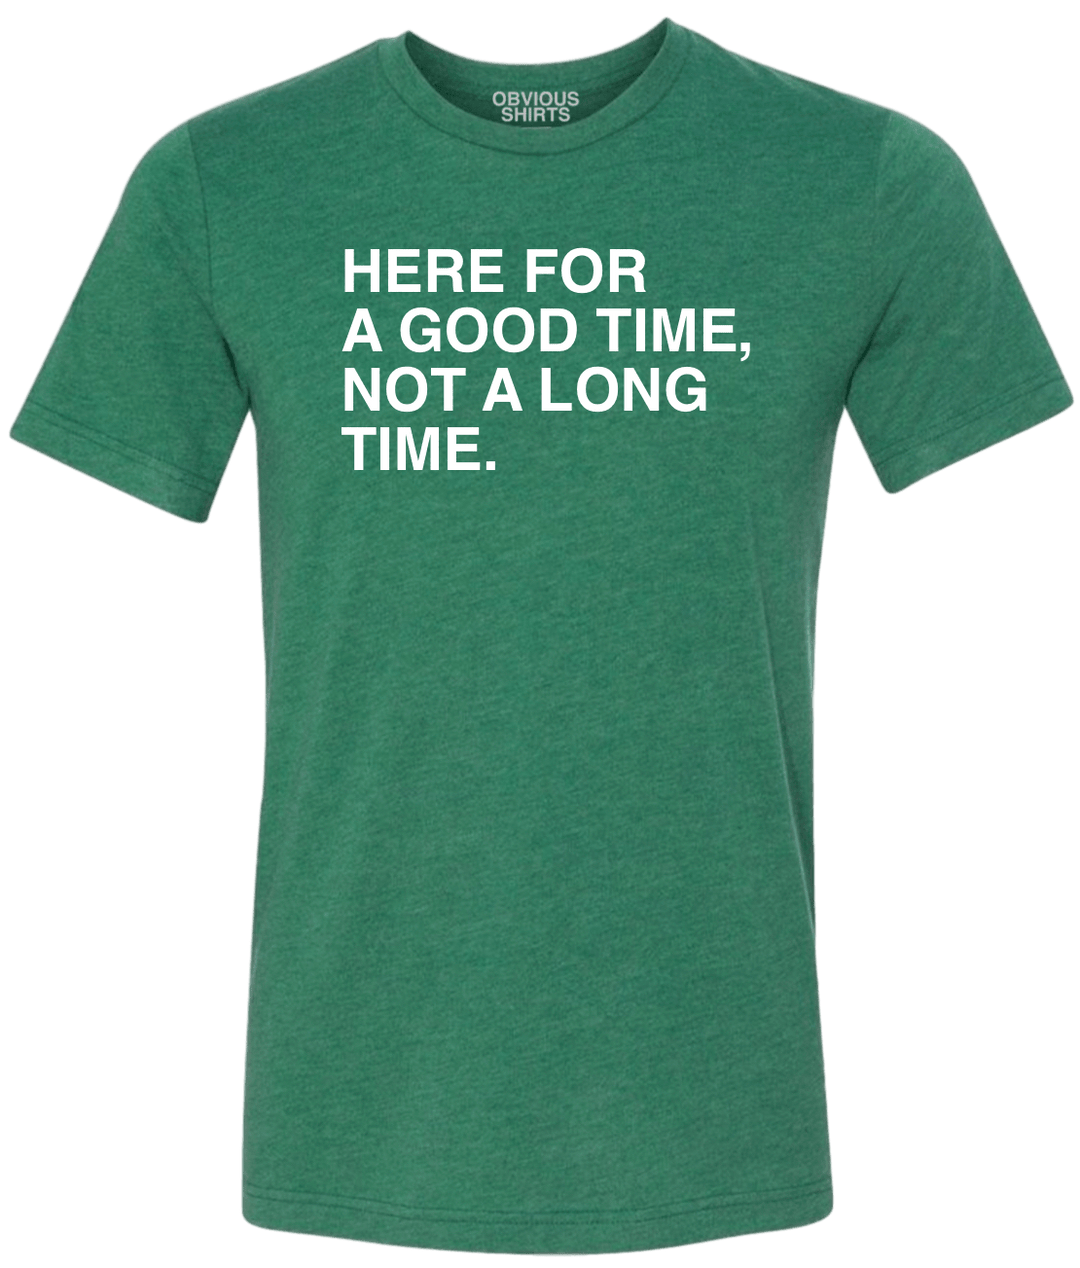 HERE FOR A GOOD TIME, NOT A LONG TIME (GREEN). - OBVIOUS SHIRTS.